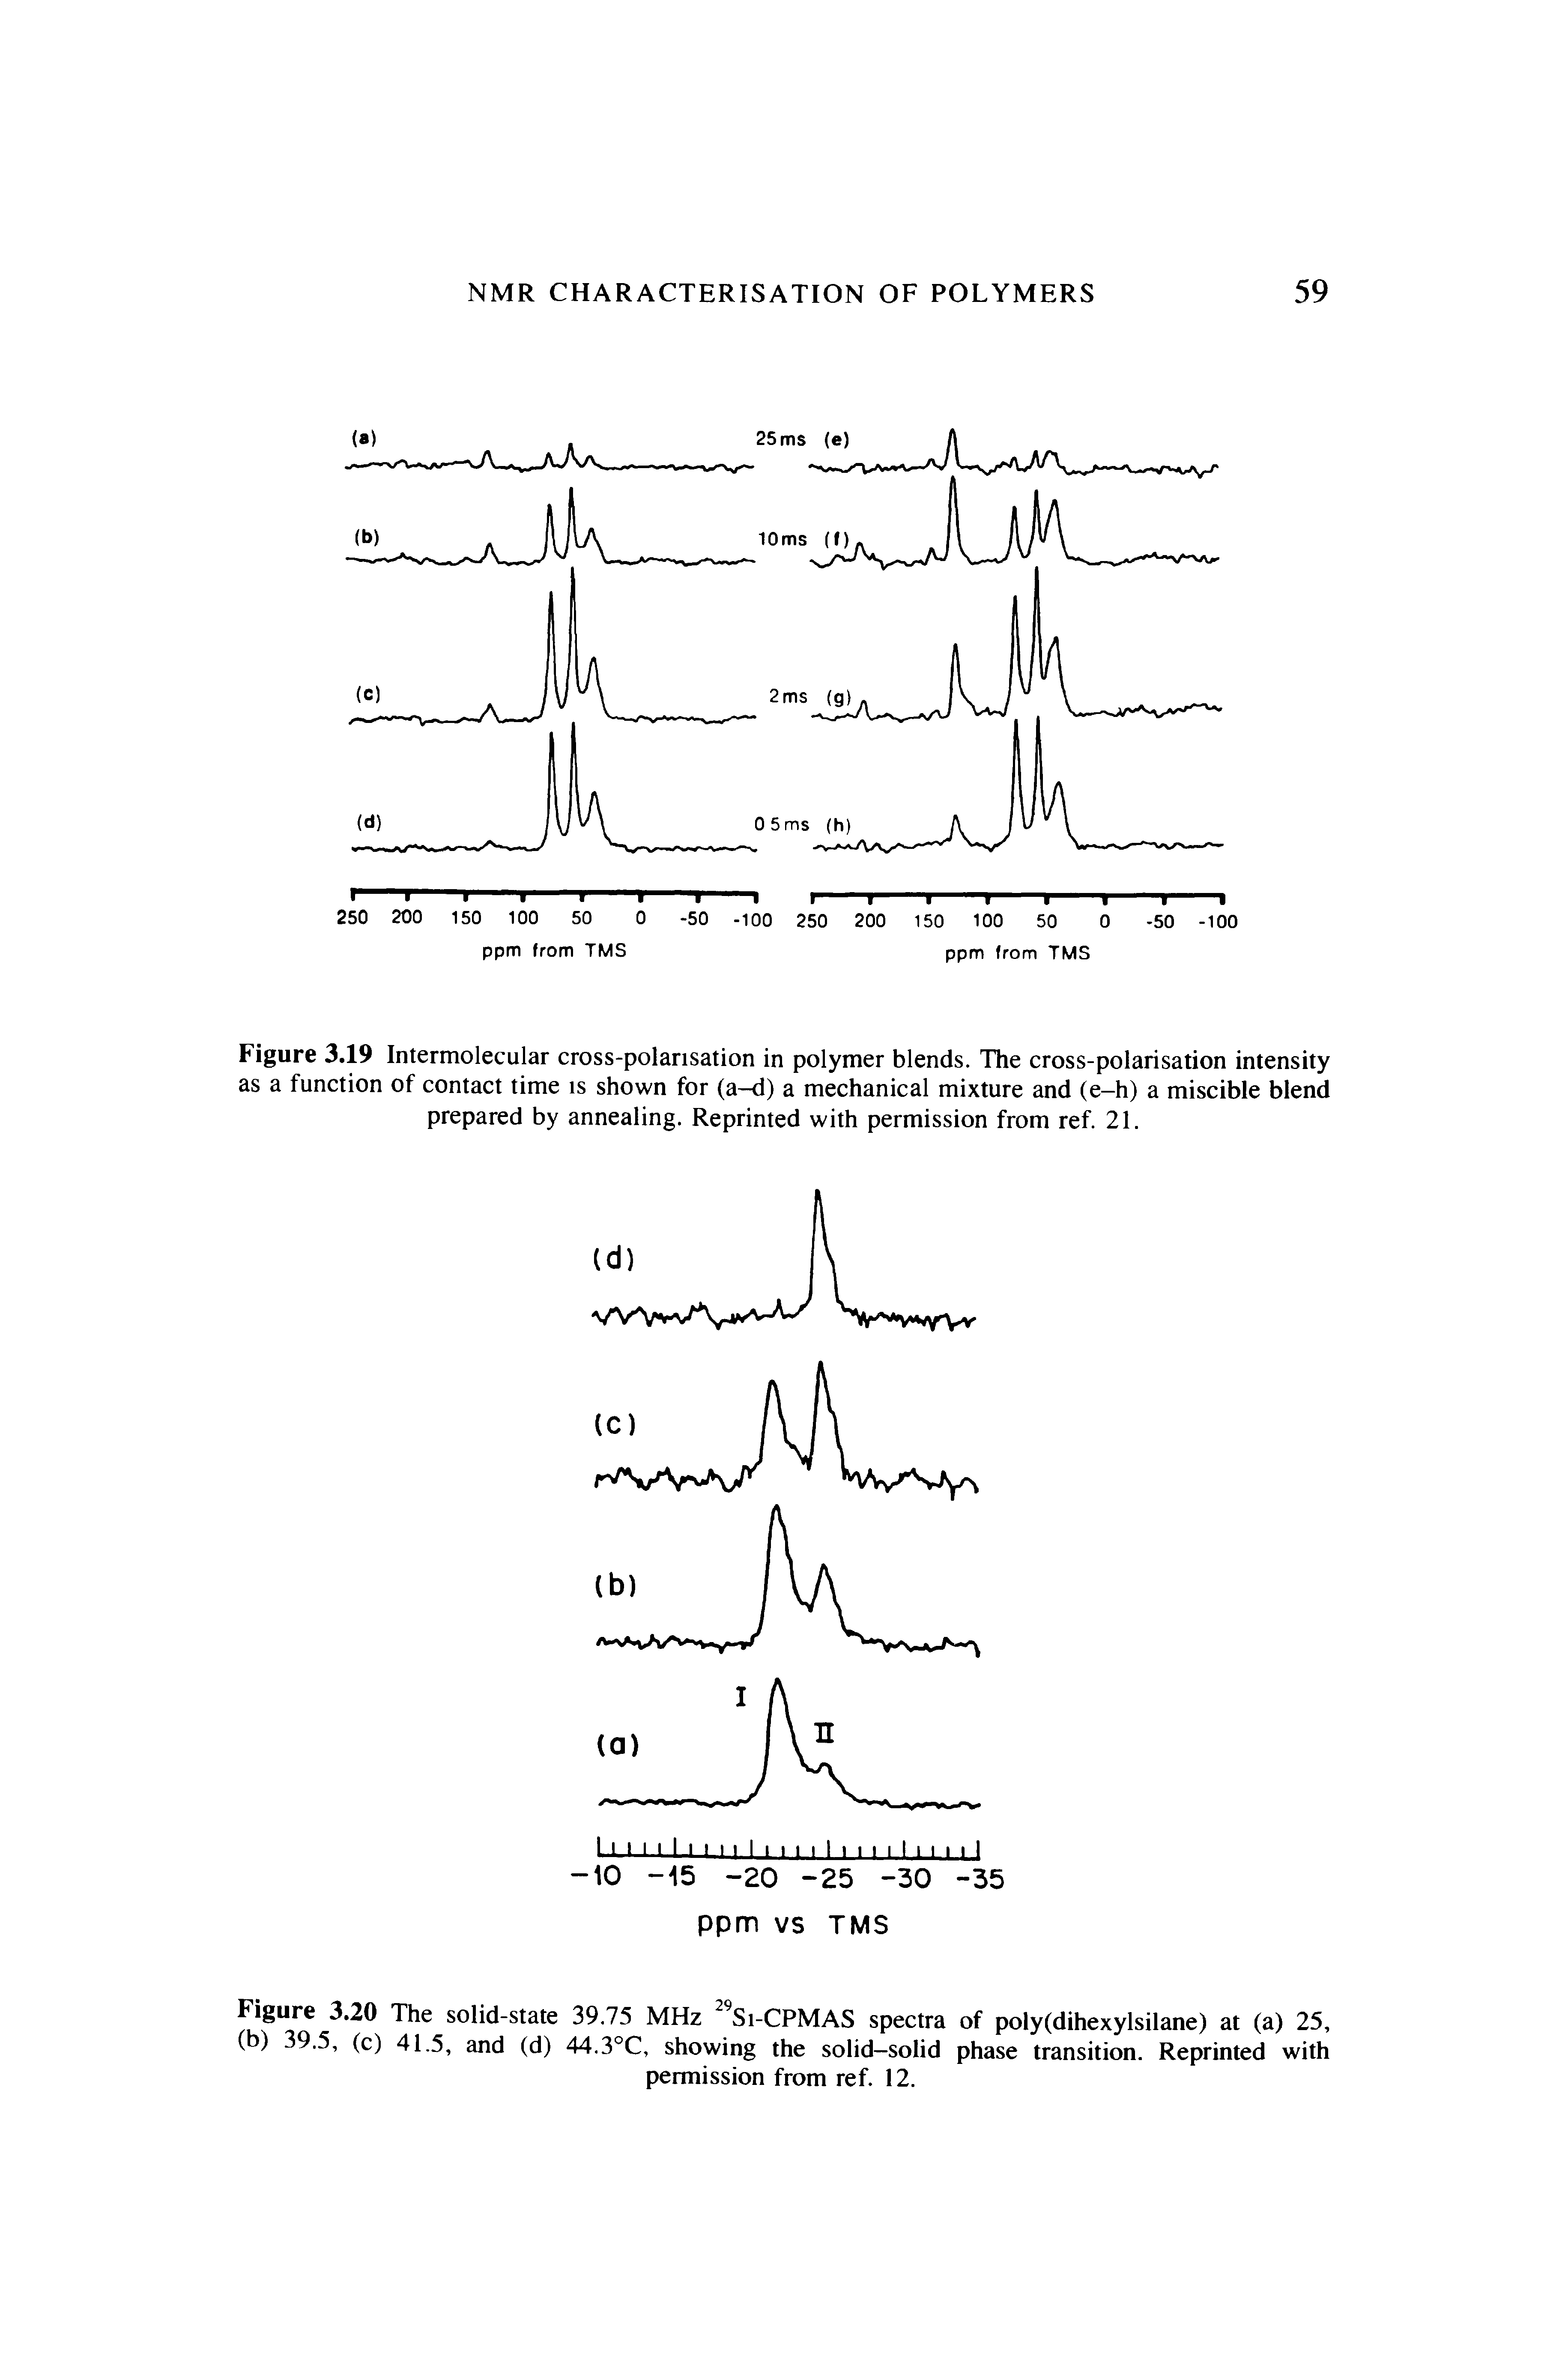 Figure 3.19 Intermolecular cross-polarisation in polymer blends. The cross-polarisation intensity as a function of contact time is shown for (a-d) a mechanical mixture and (e-h) a miscible blend prepared by annealing. Reprinted with permission from ref. 21.